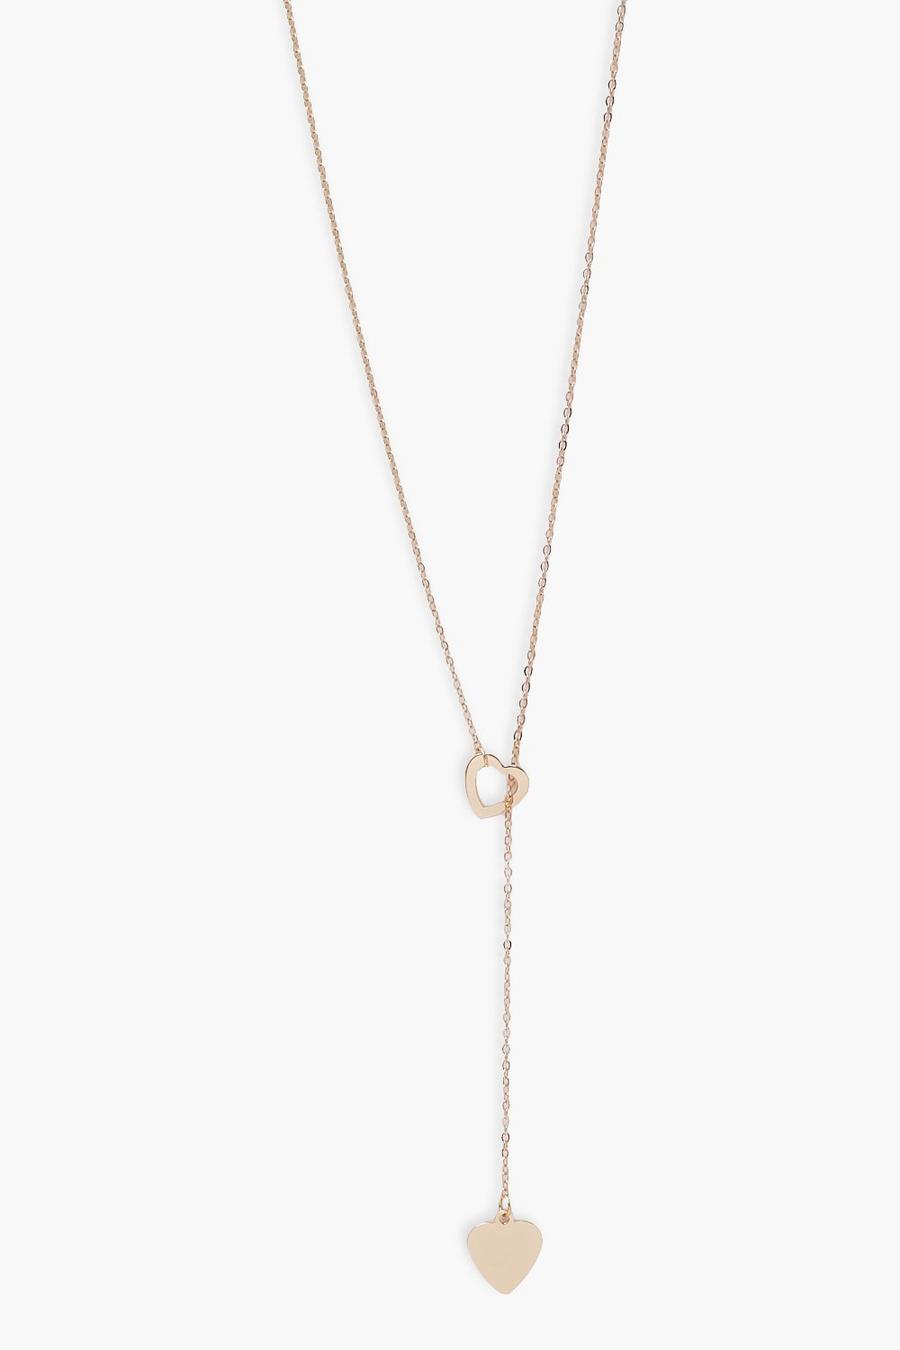 Gold metallic Simple Heart Drop Chain Necklace